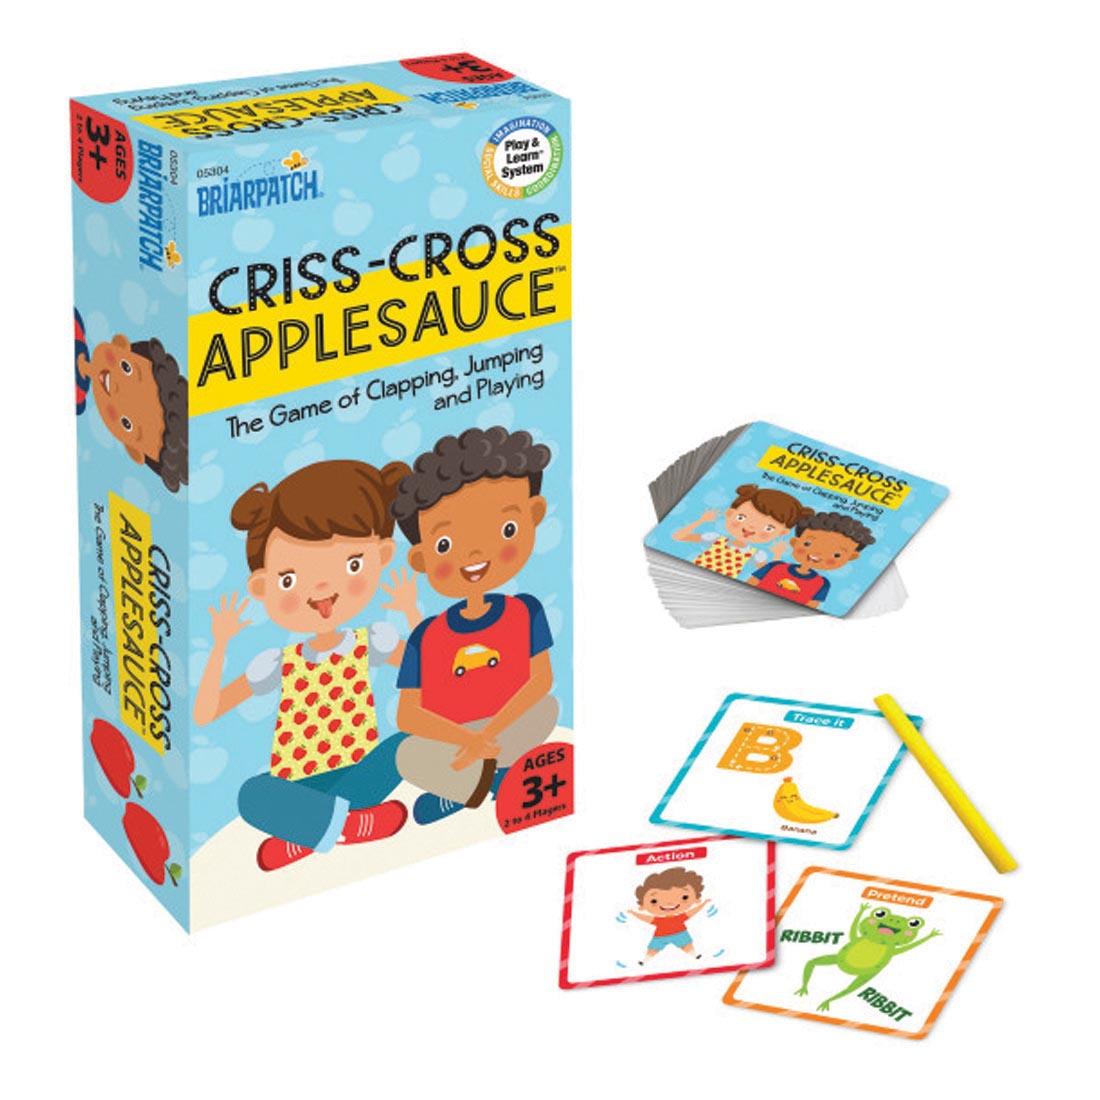 Criss-Cross Applesauce Game By Briarpatch